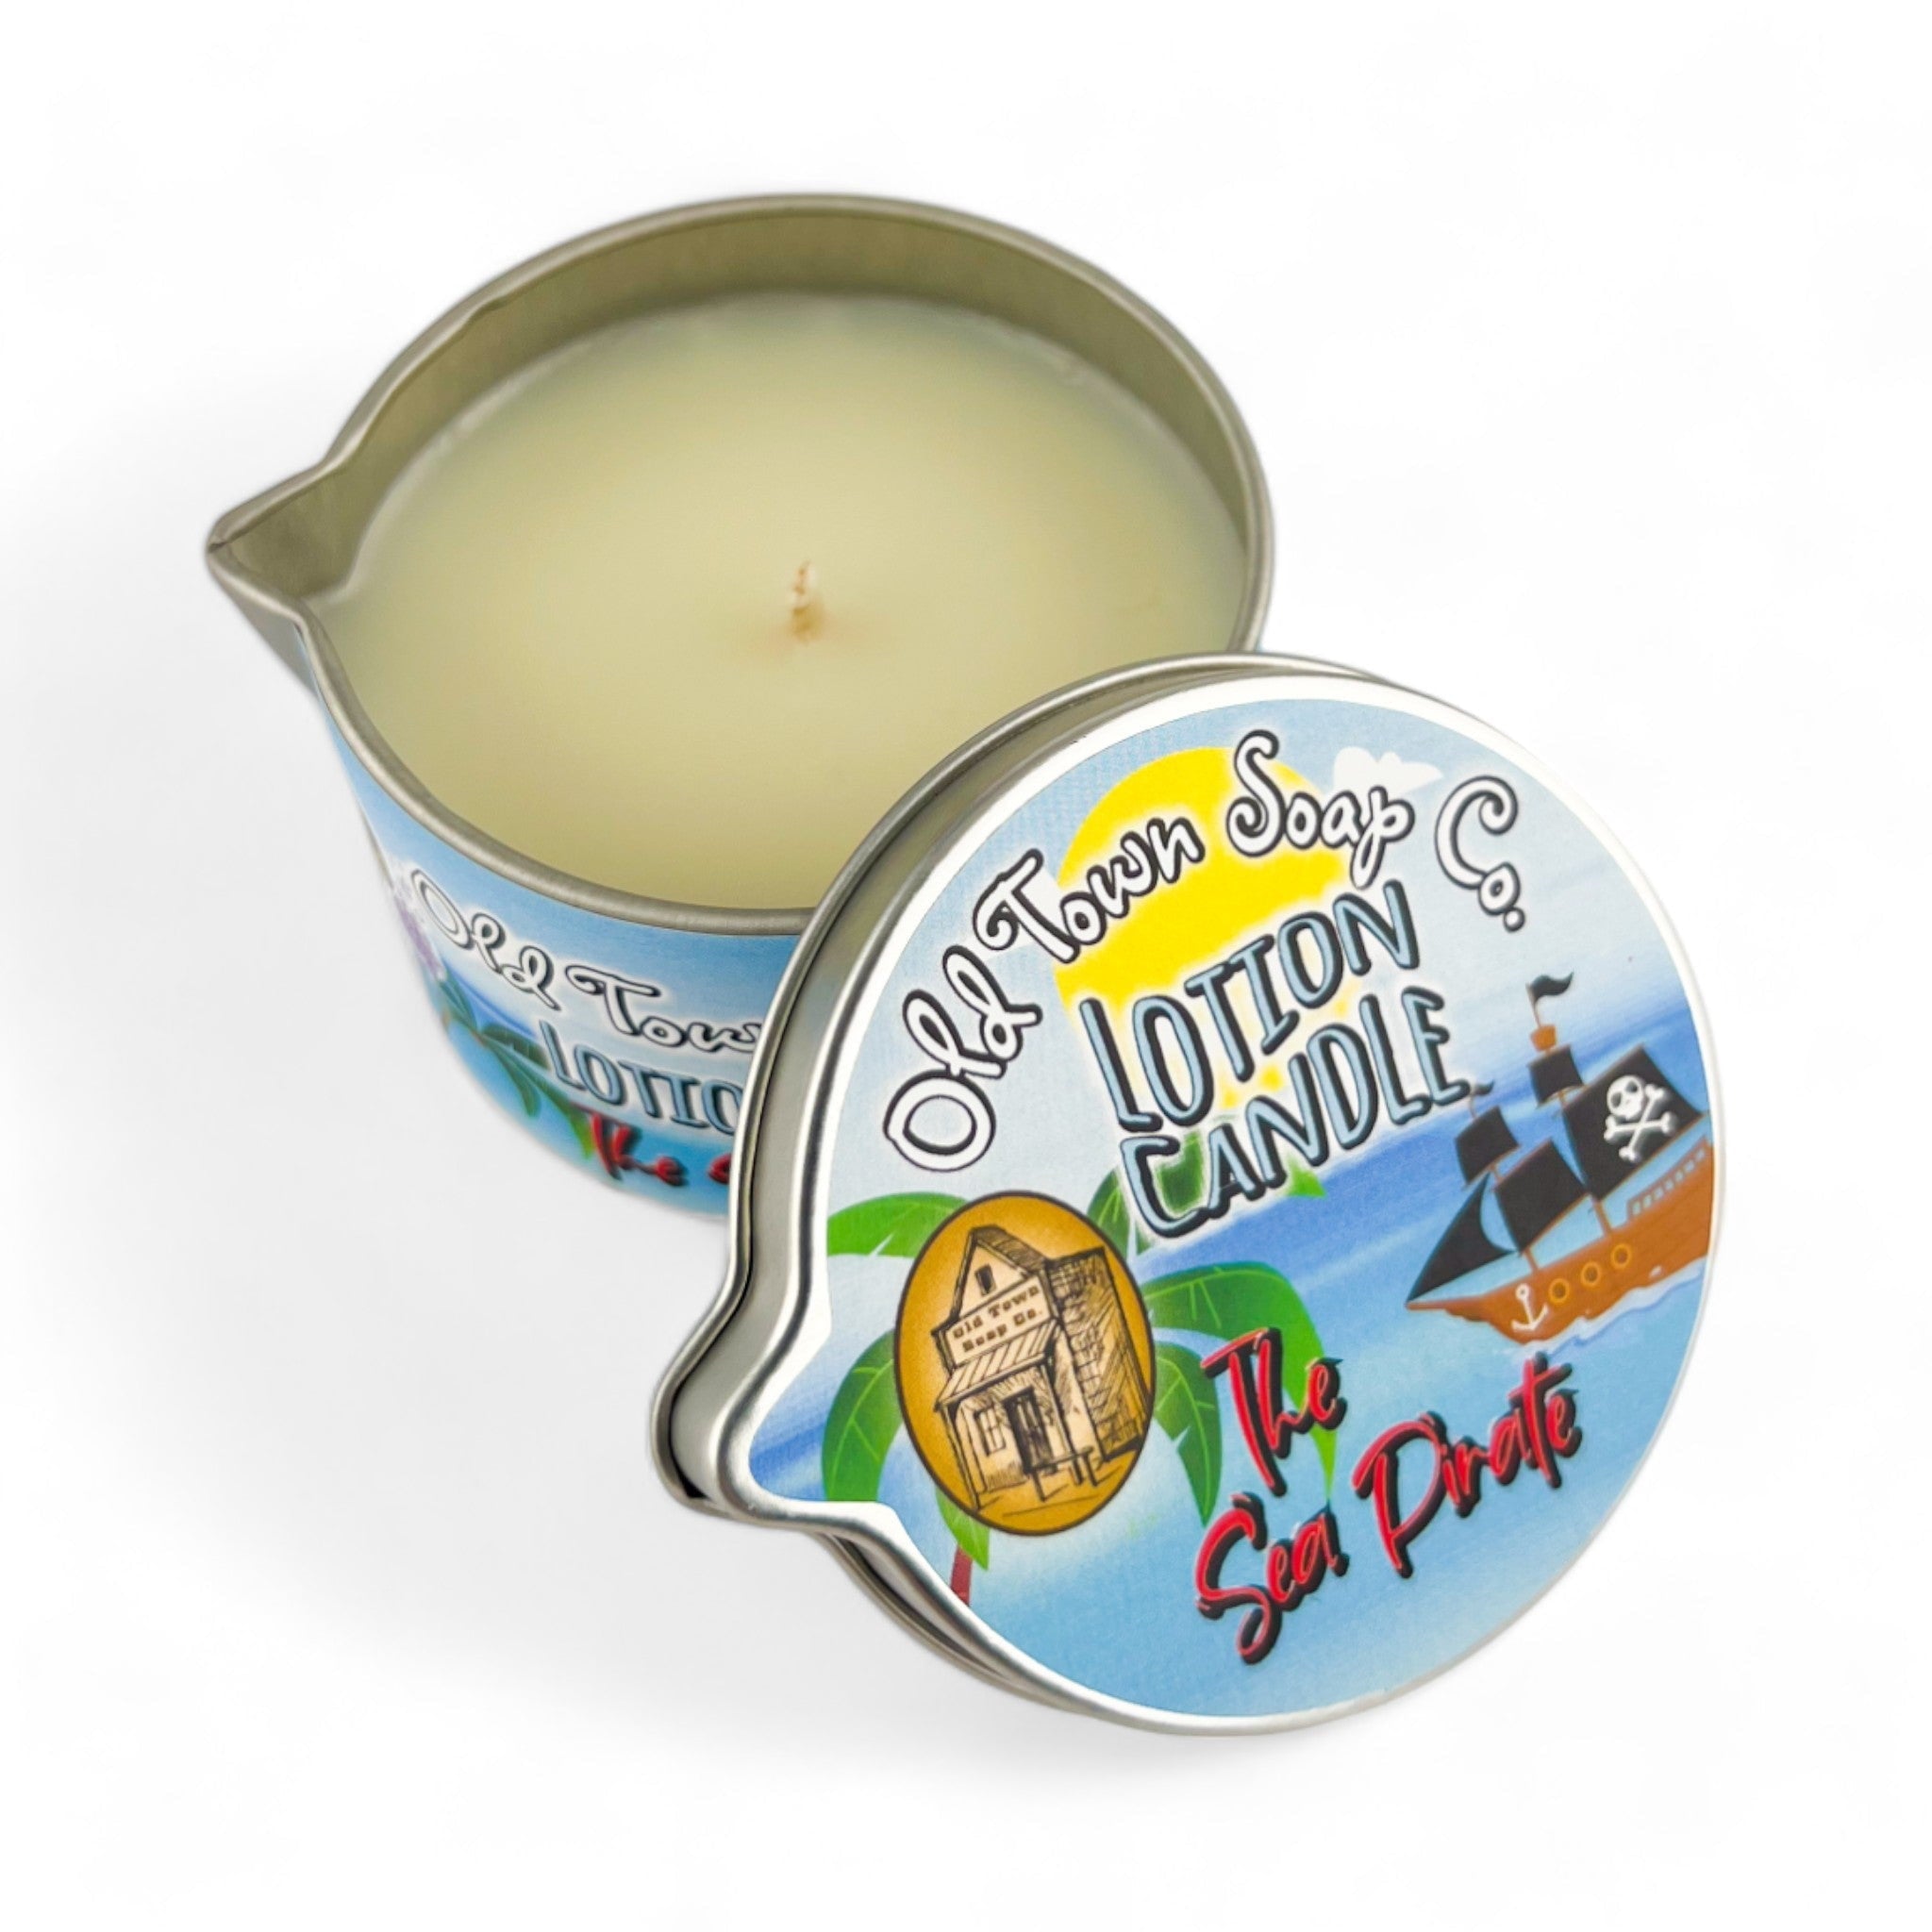 The Sea Pirate -Lotion Candle - Old Town Soap Co.